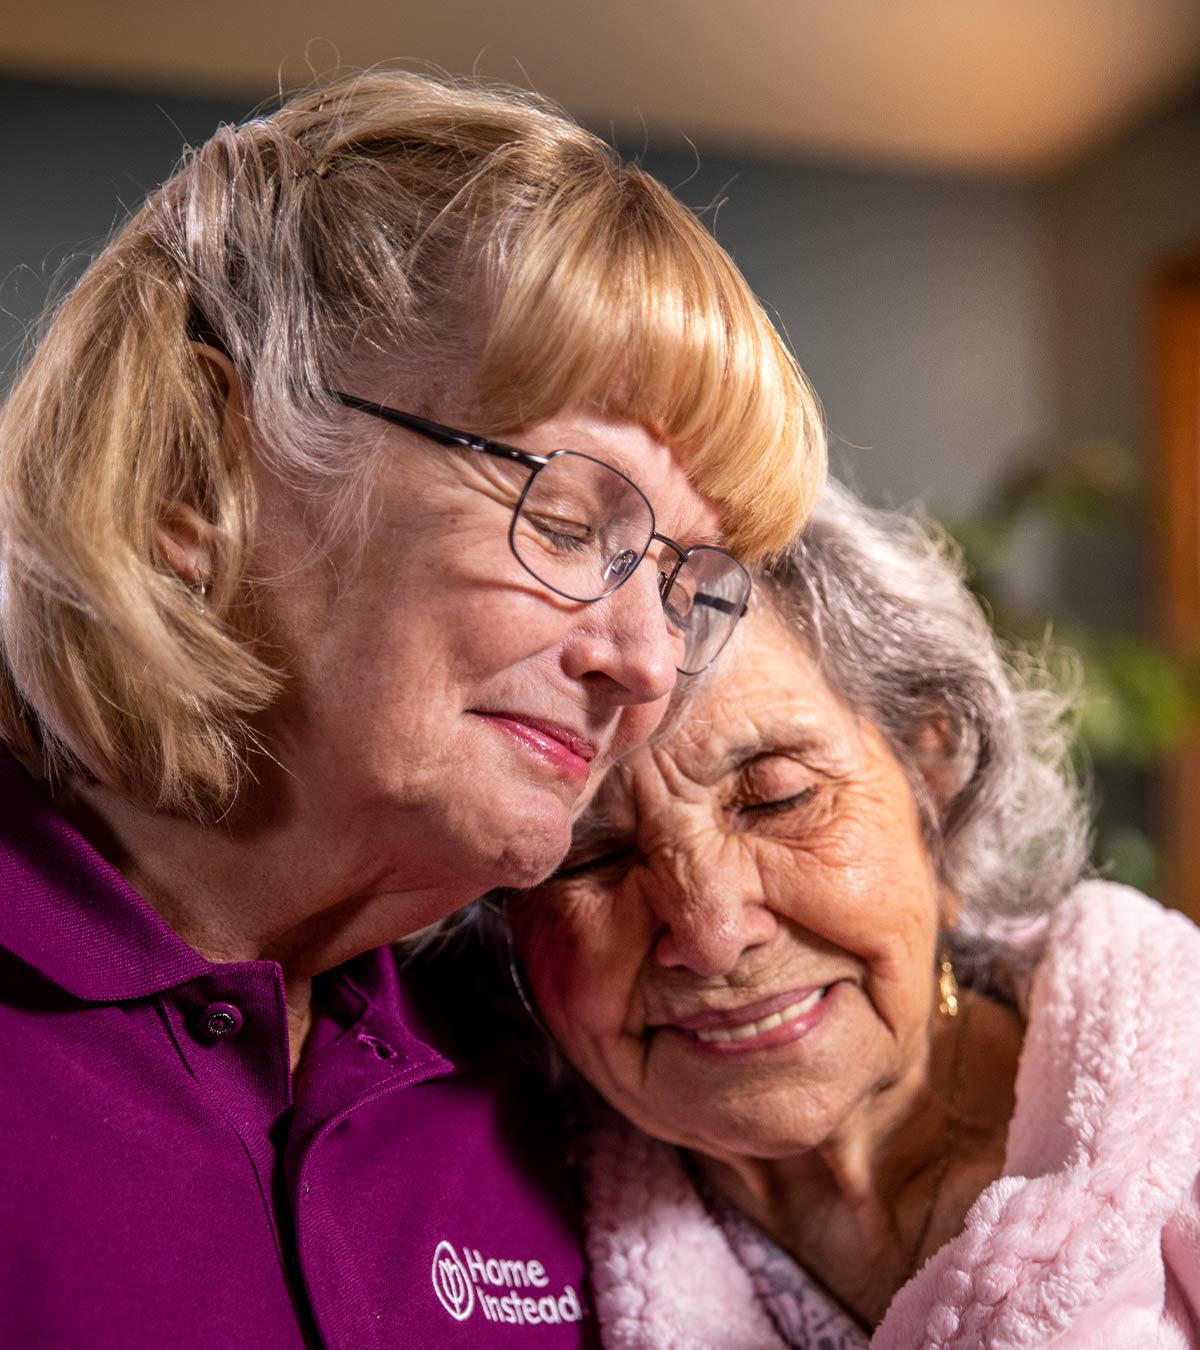 CAREGiver providing in-home senior care services. Home Instead of Culpeper, VA provides Elder Care to aging adults. 